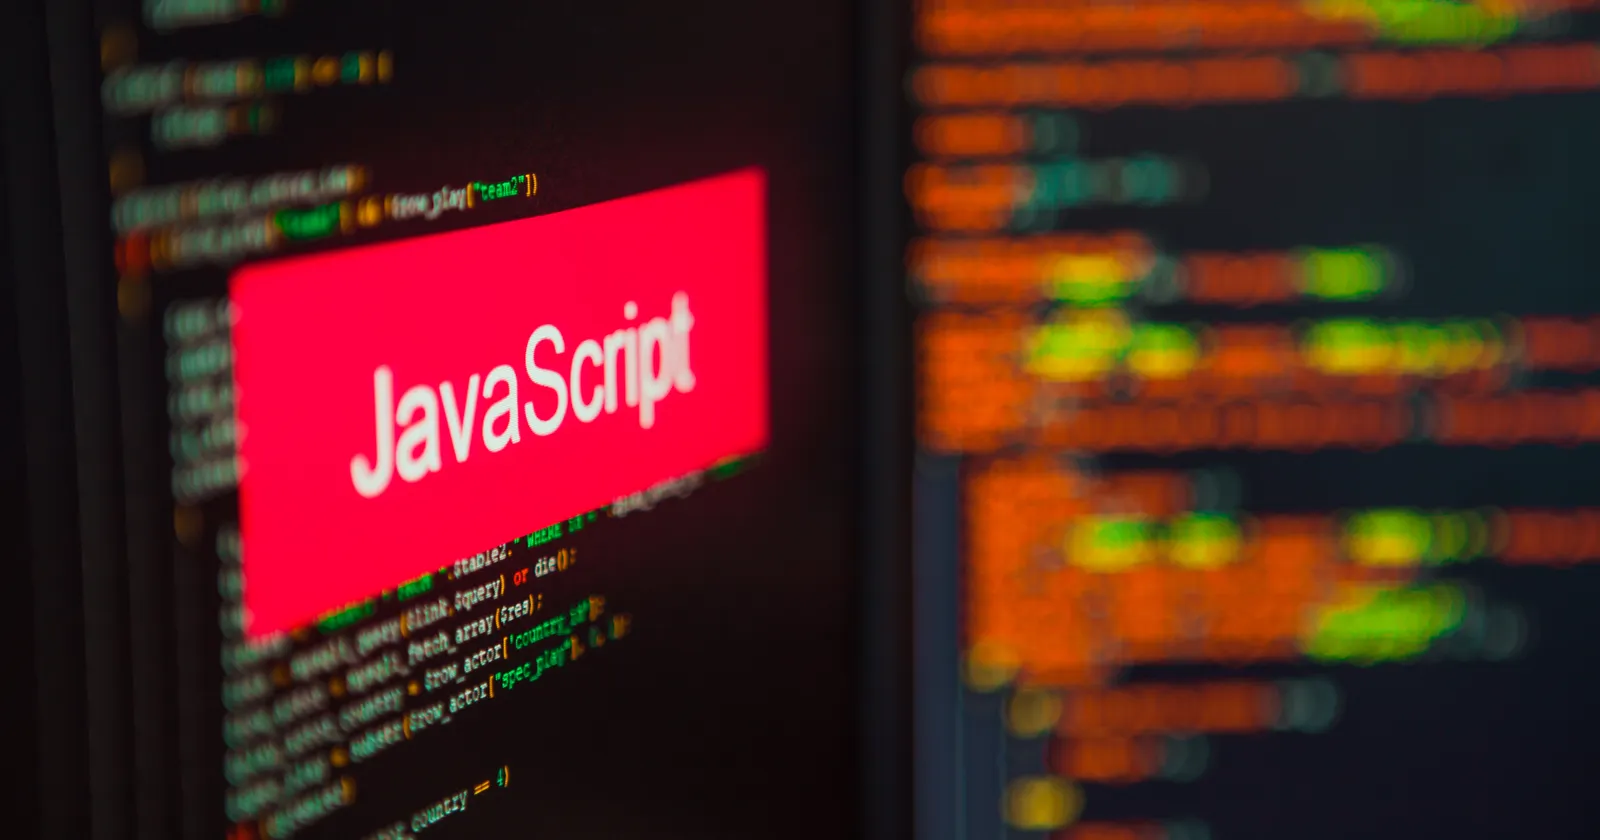 How Well Do You Know Your JavaScript Fundamentals?